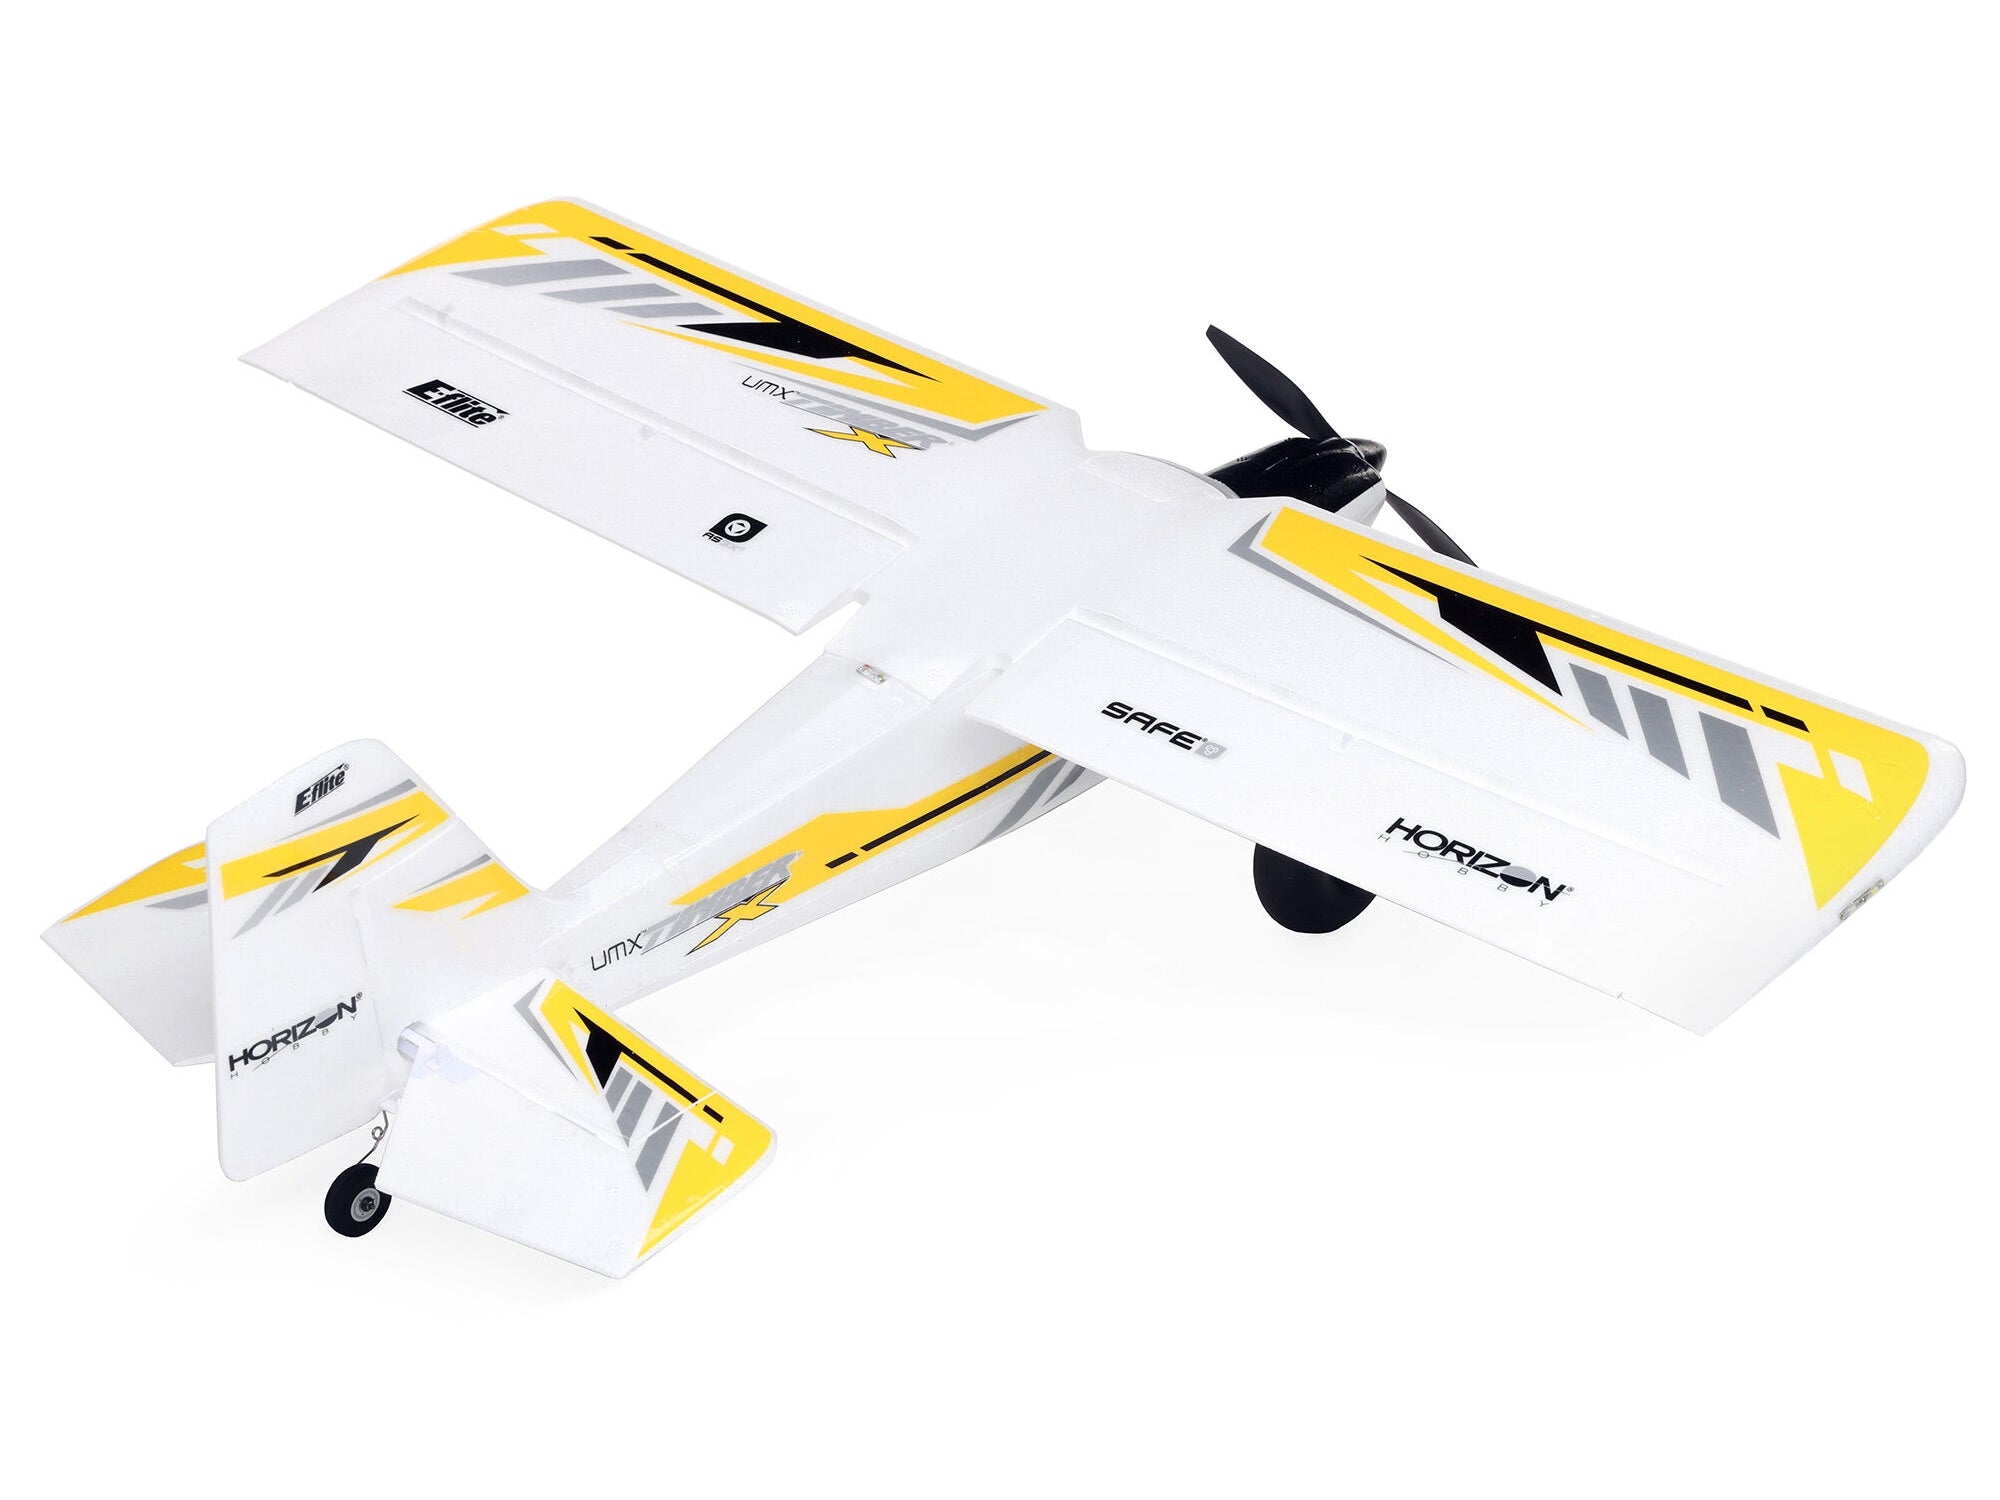 E-Flite UMX Timber X BNF Basic with AS3X and SAFE Select 570mm EFLU7950